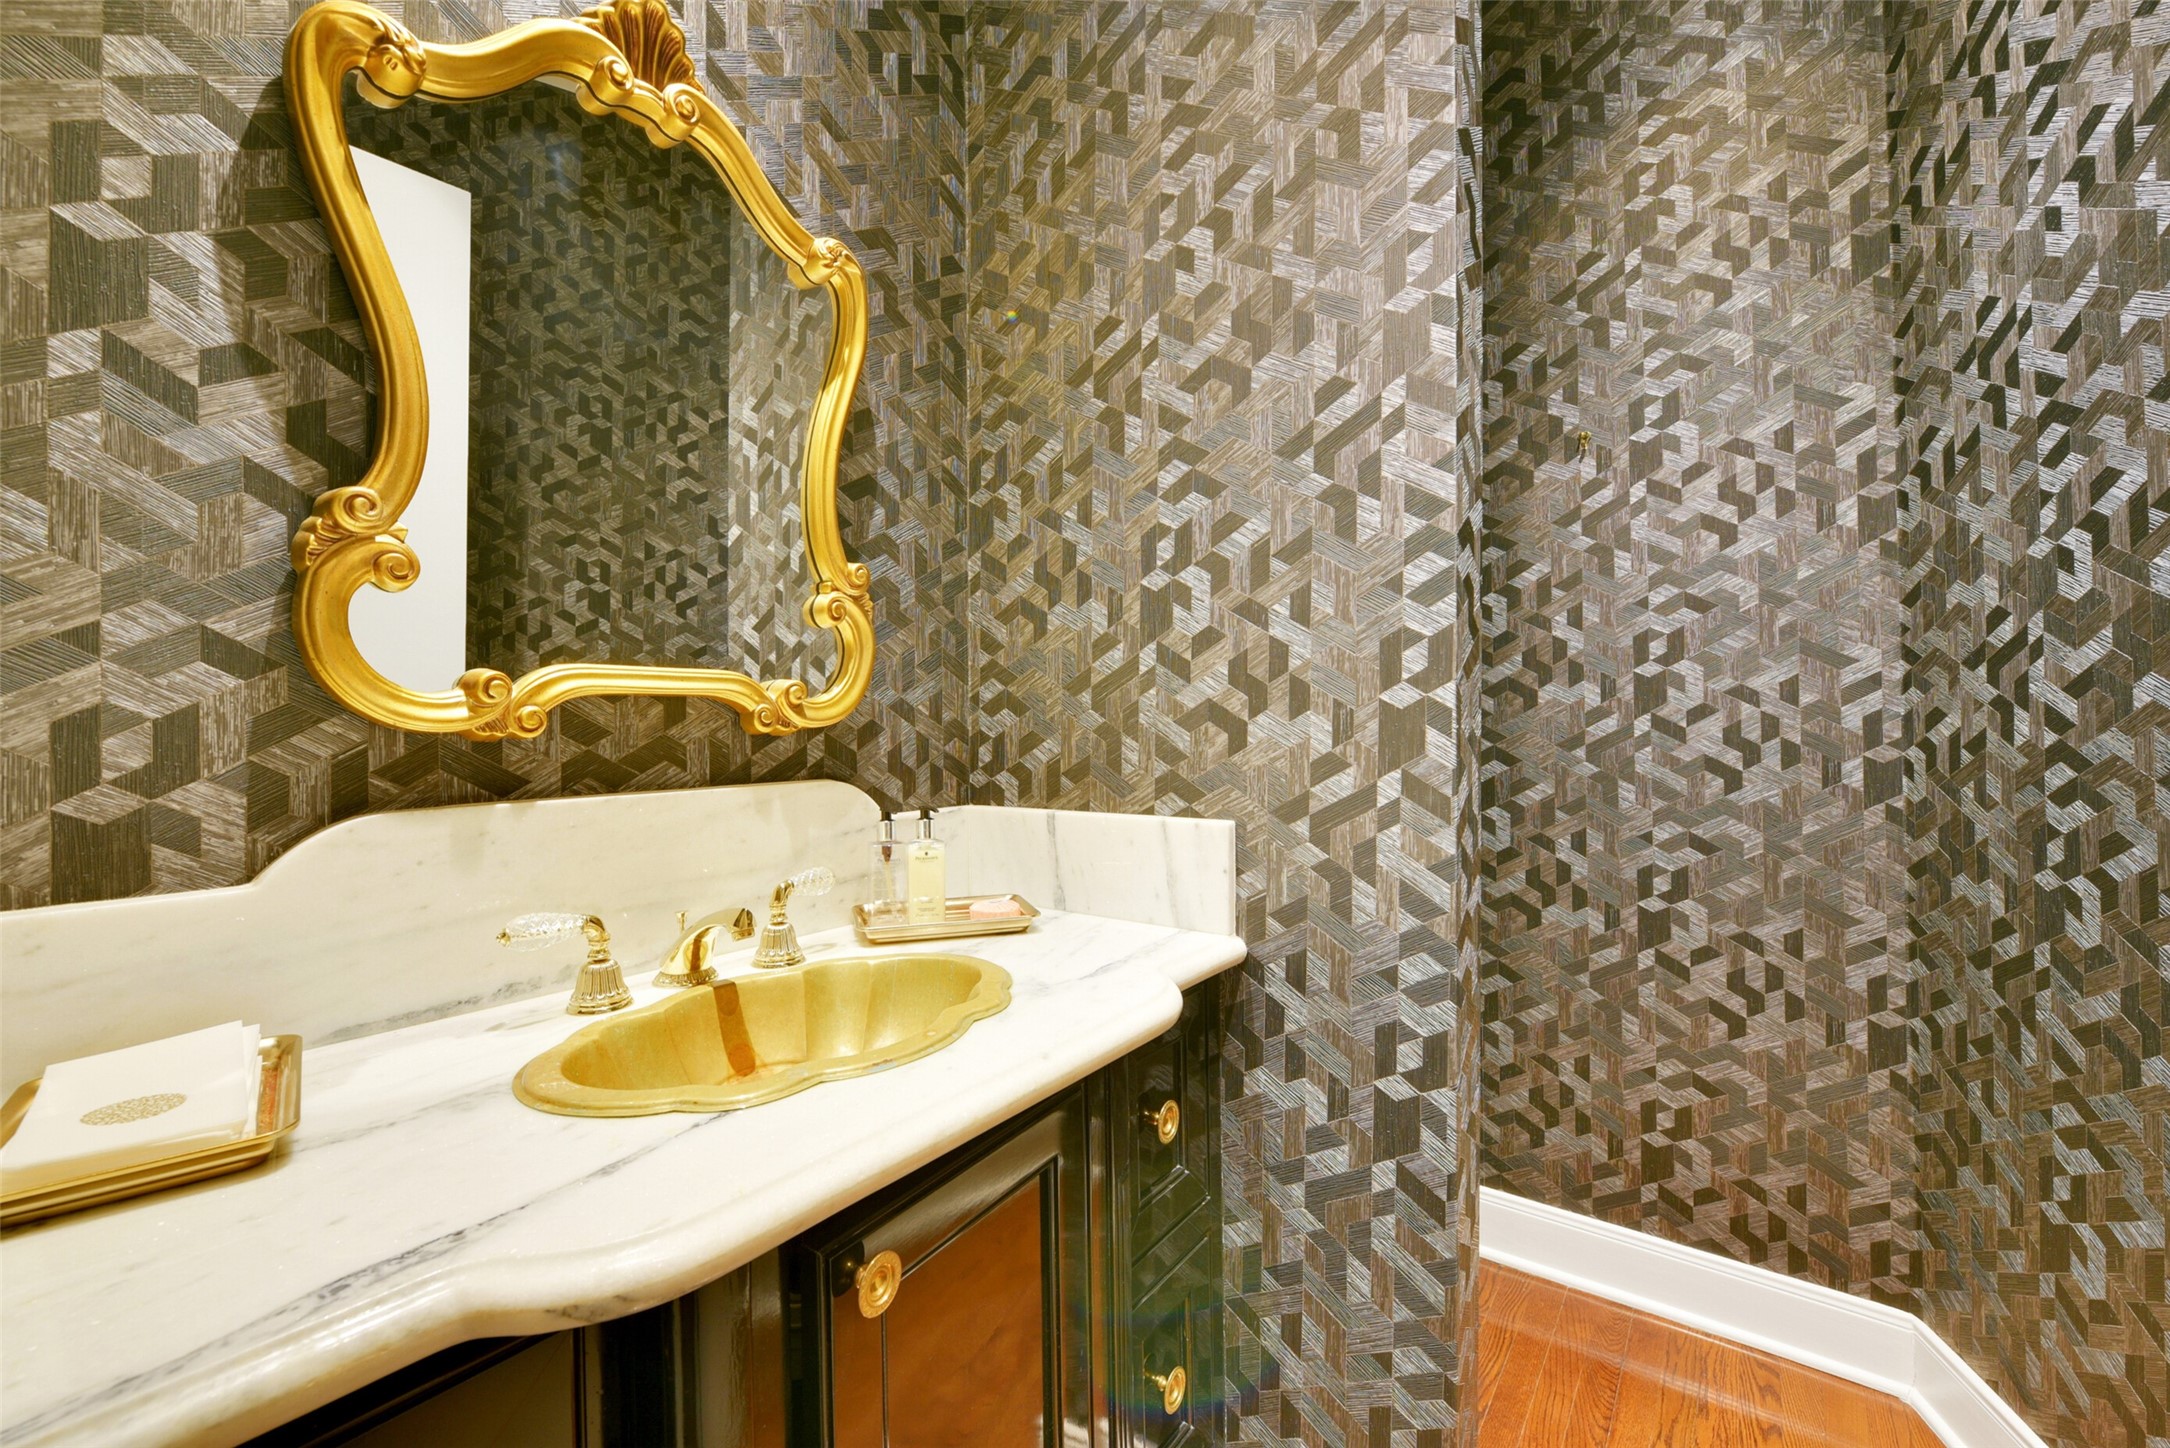 Elegantly appointed with designers finishes, the powder room is located off the entry foyer.